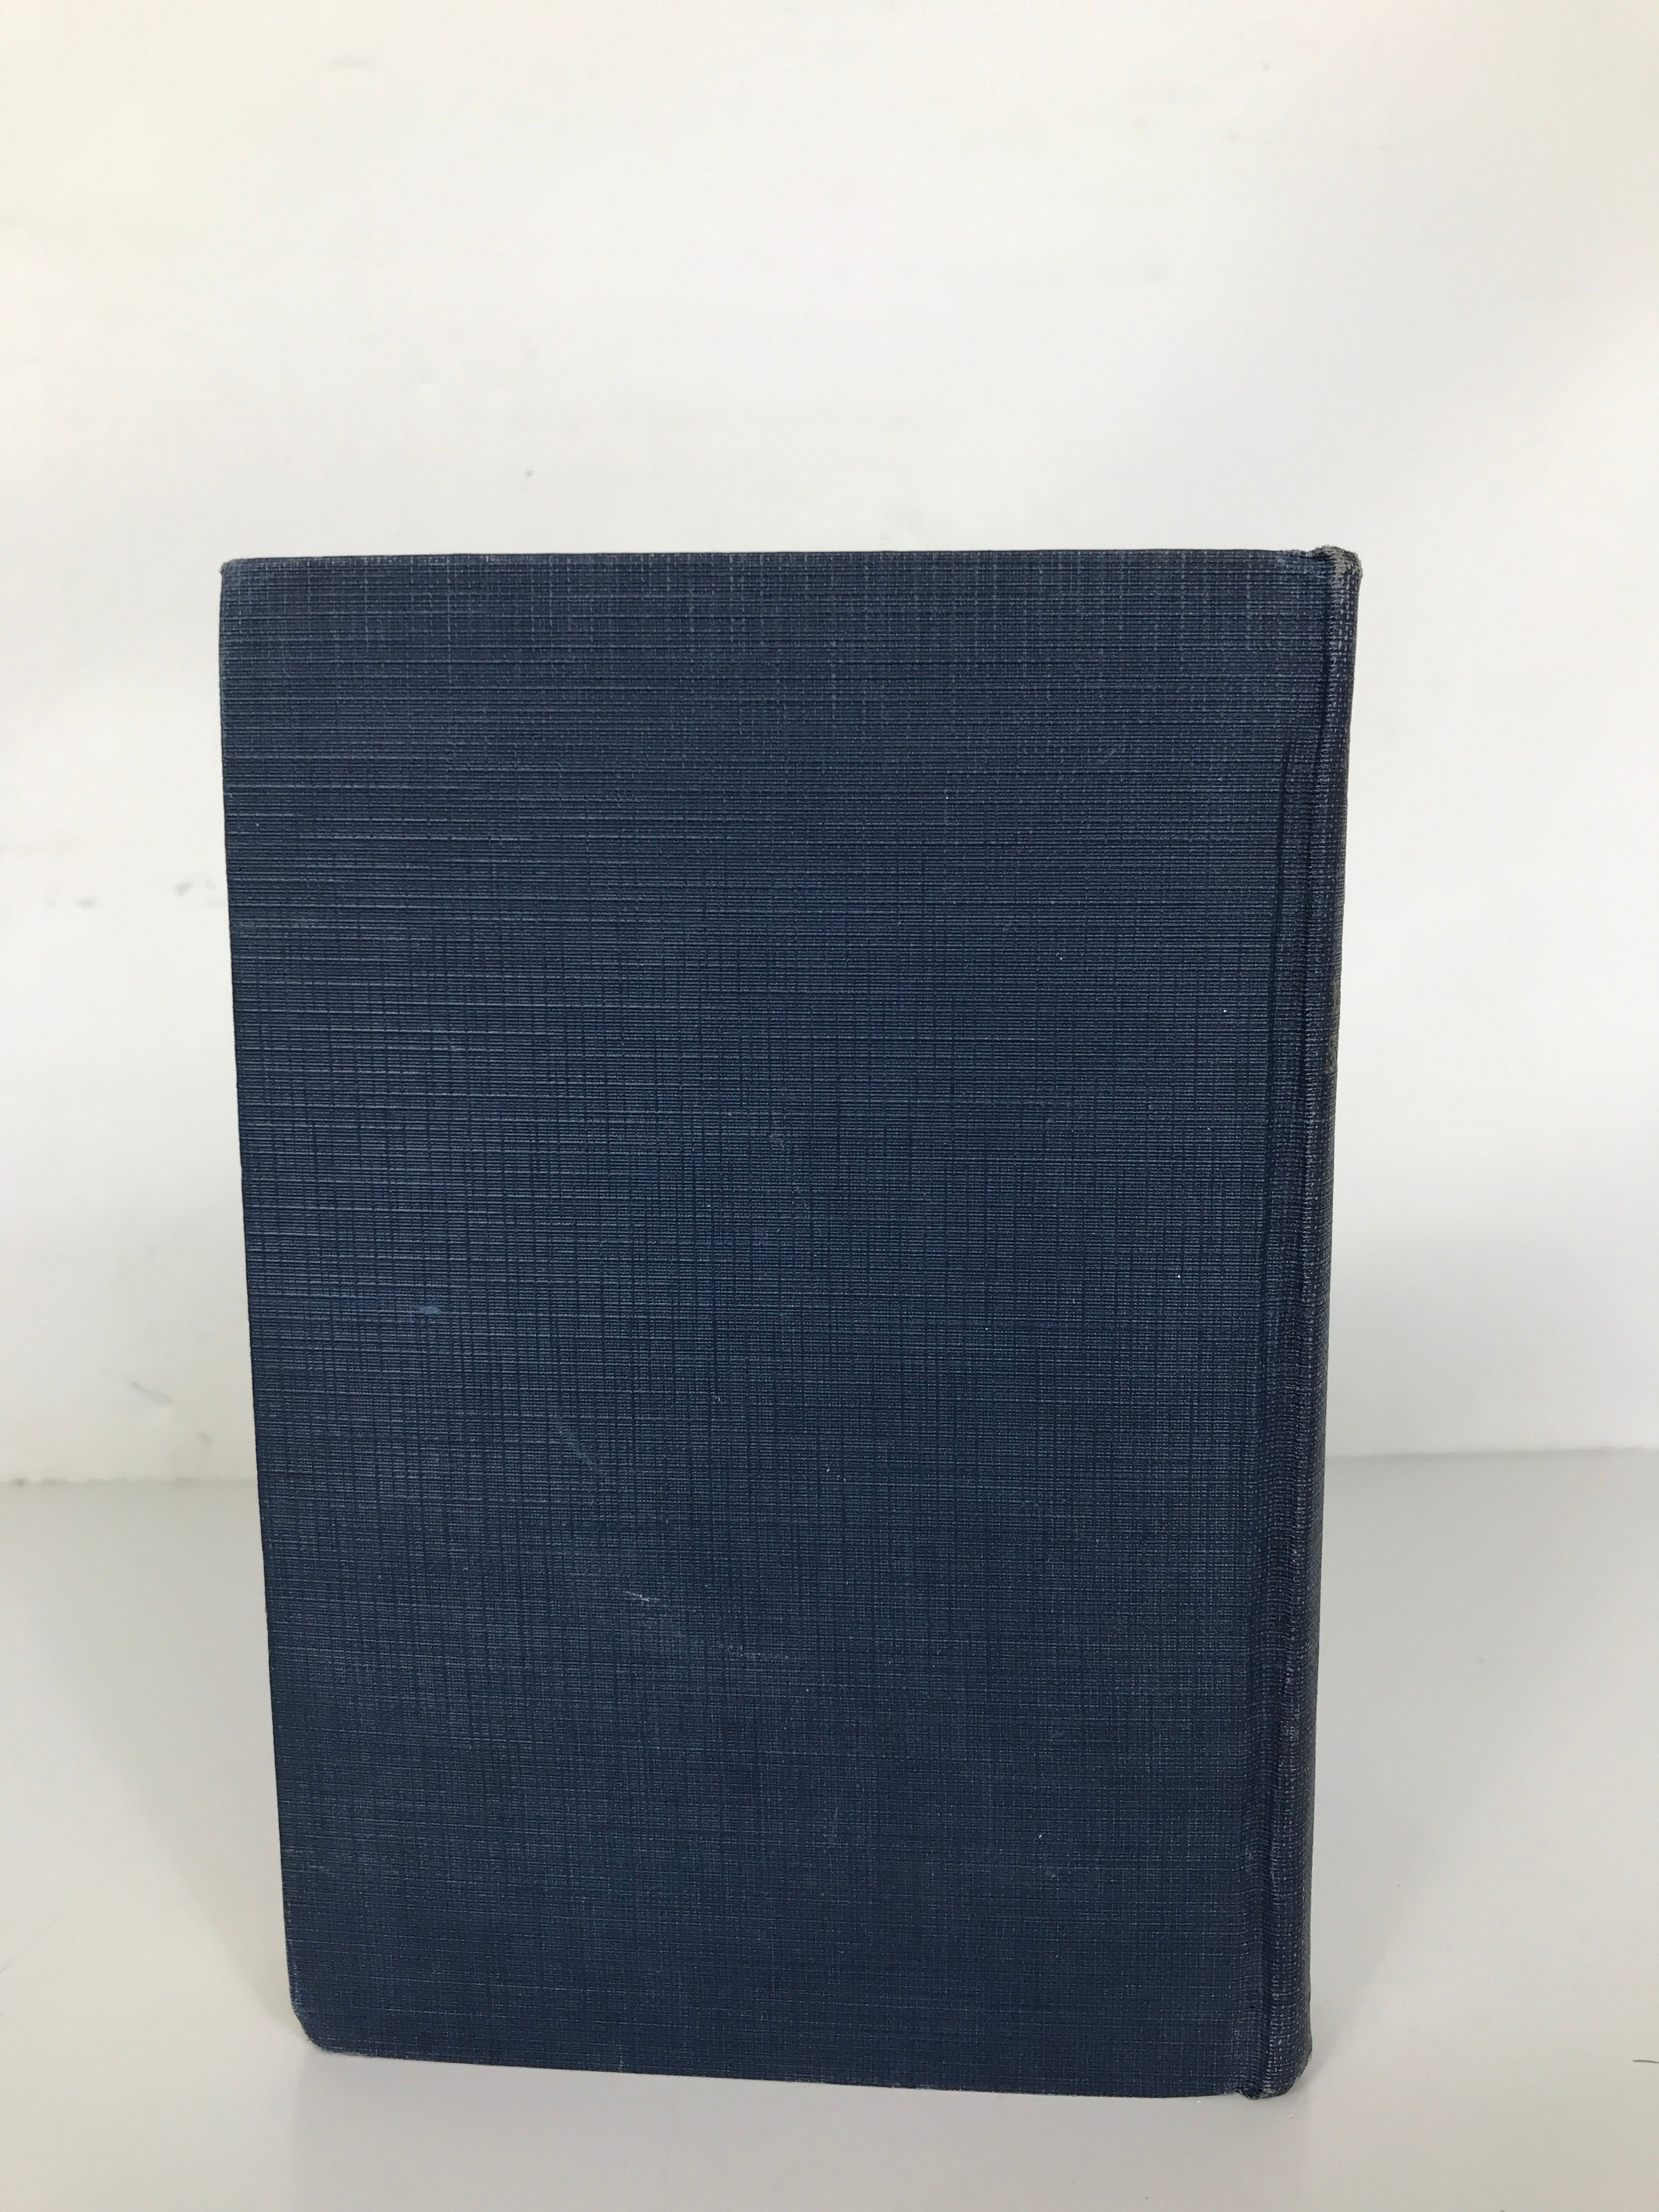 Lot of 2 Anne Douglas Sedgwick First Editions:1907-1908 HC